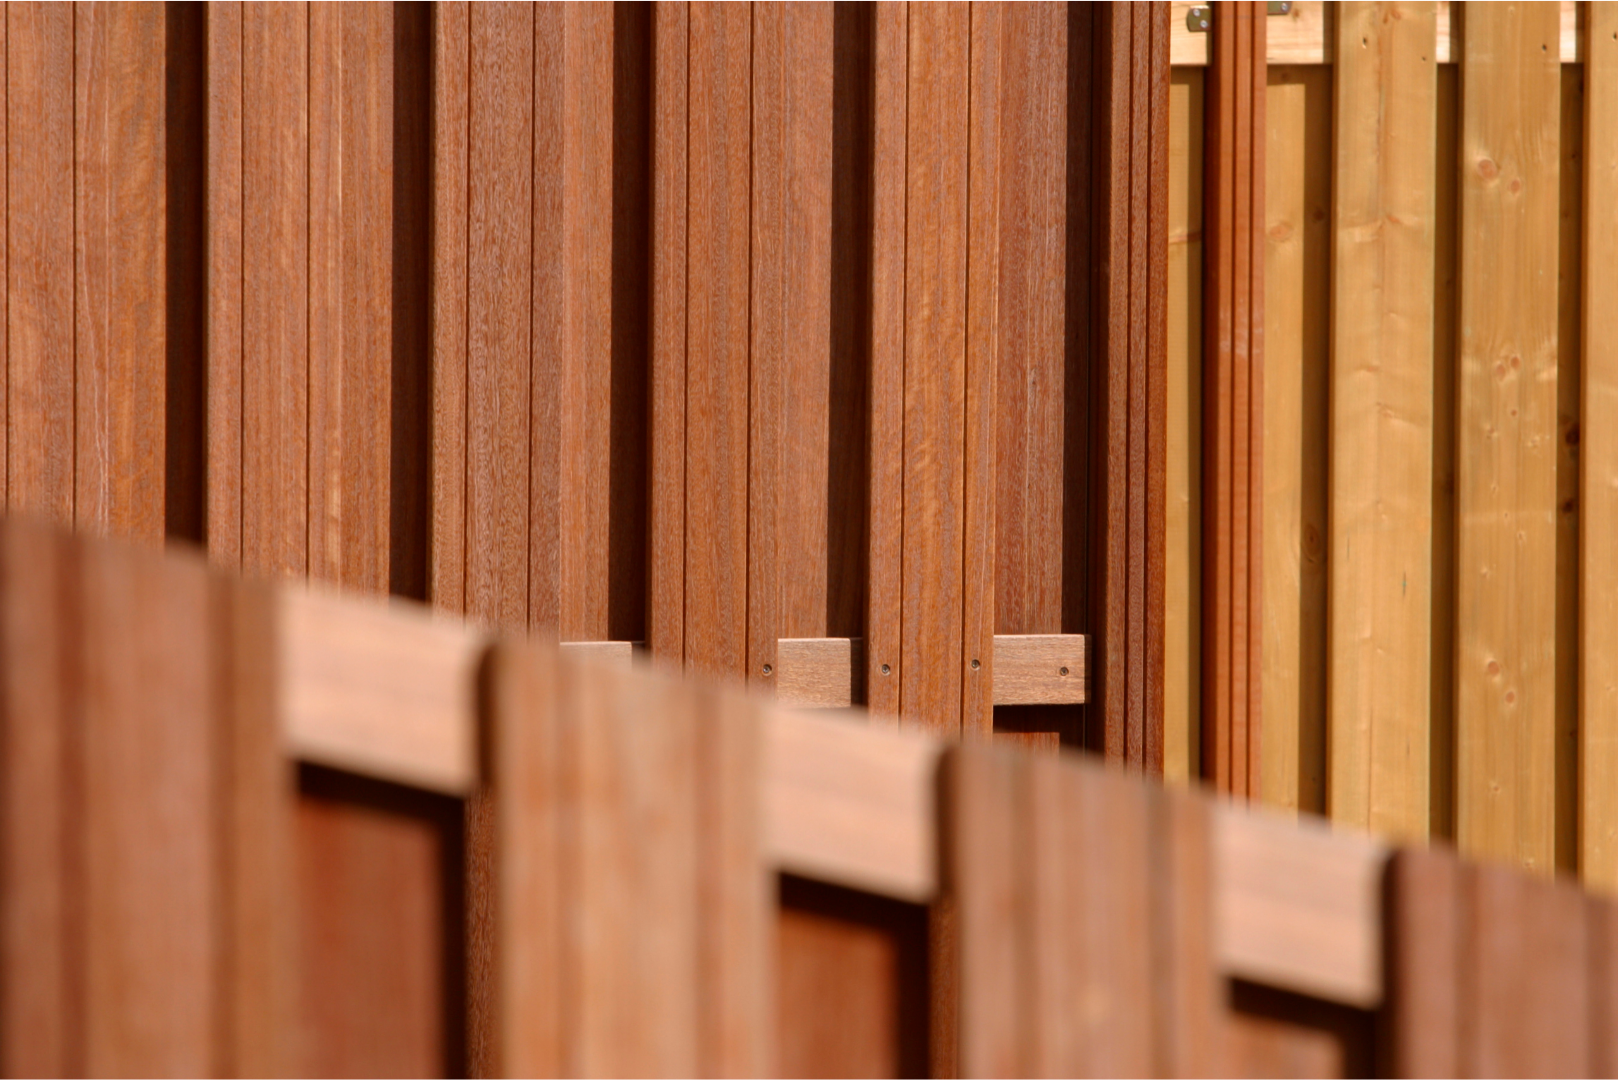 Image of a wood fence